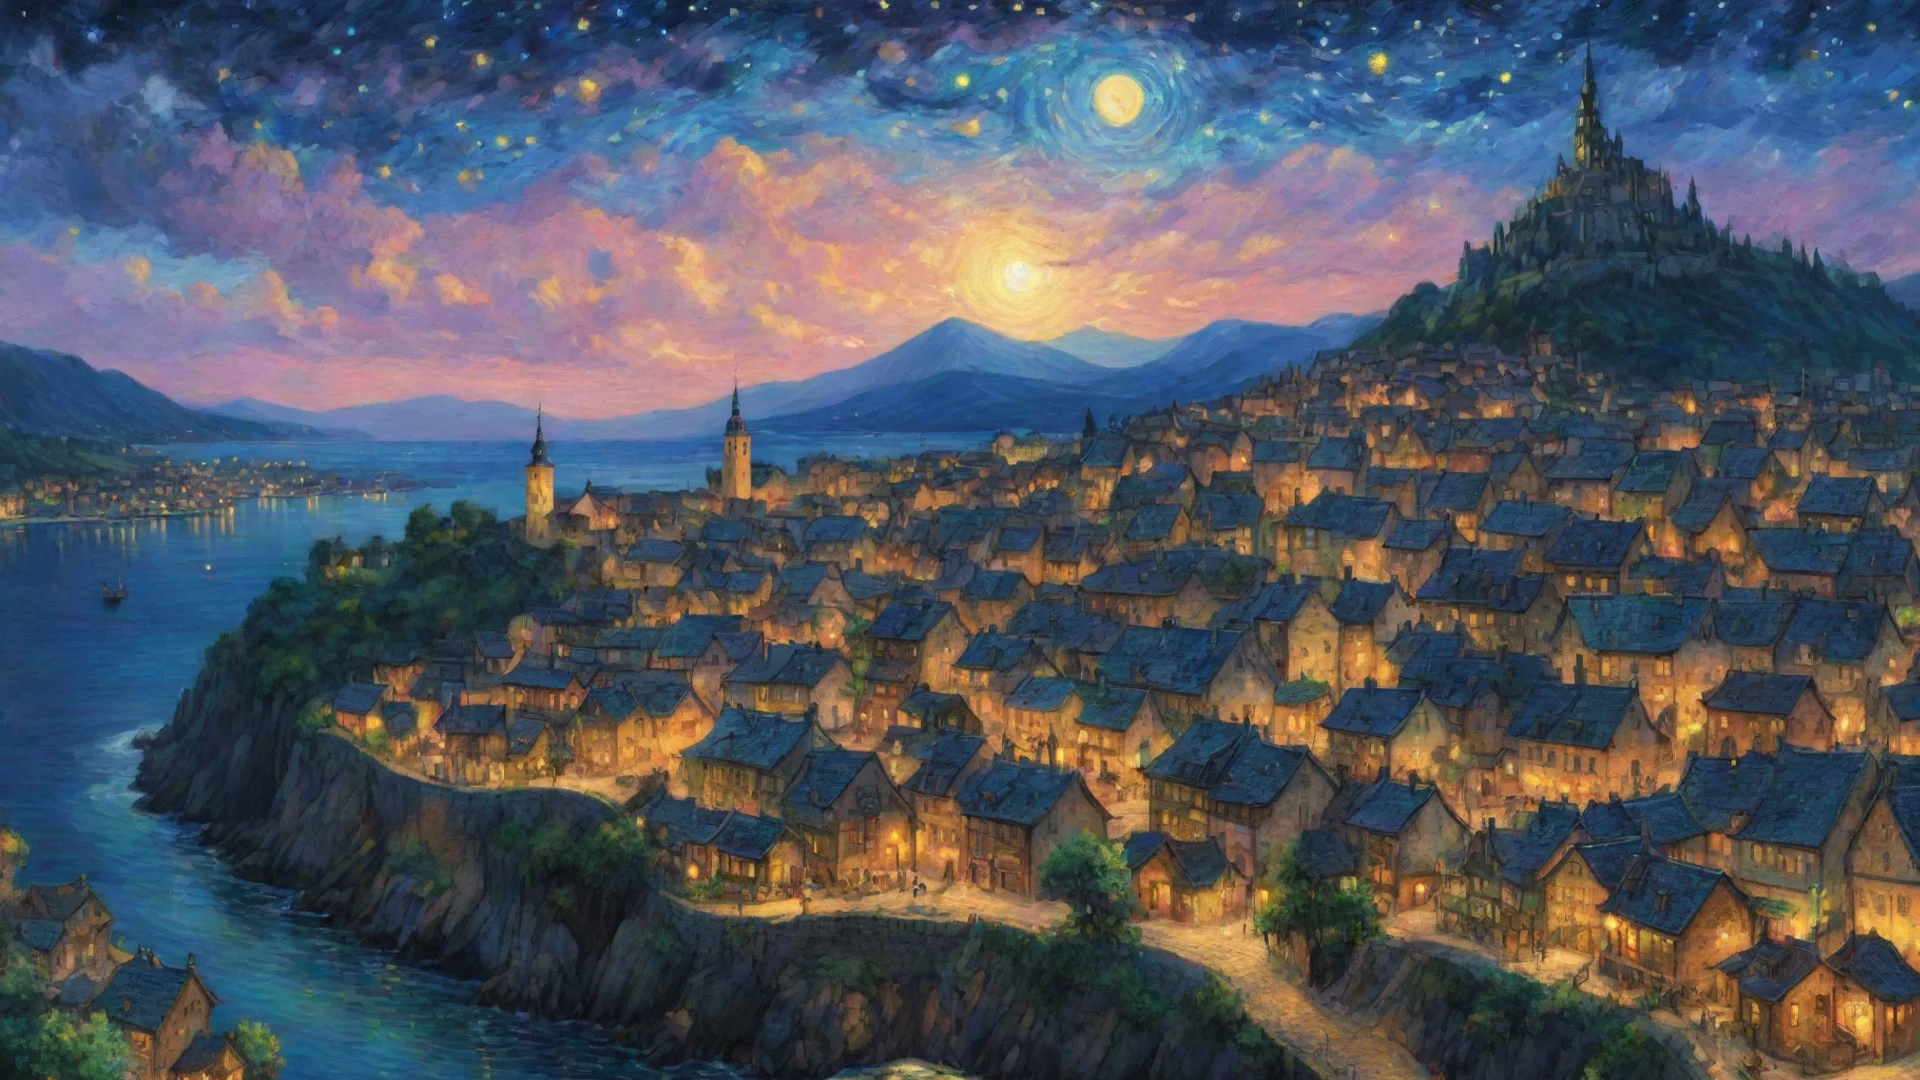 aiamazing epic town lit up at night sky epic lovely artistic ghibli van gogh happyness bliss peace  detailed asthetic hd wow awesome portrait 2 wide